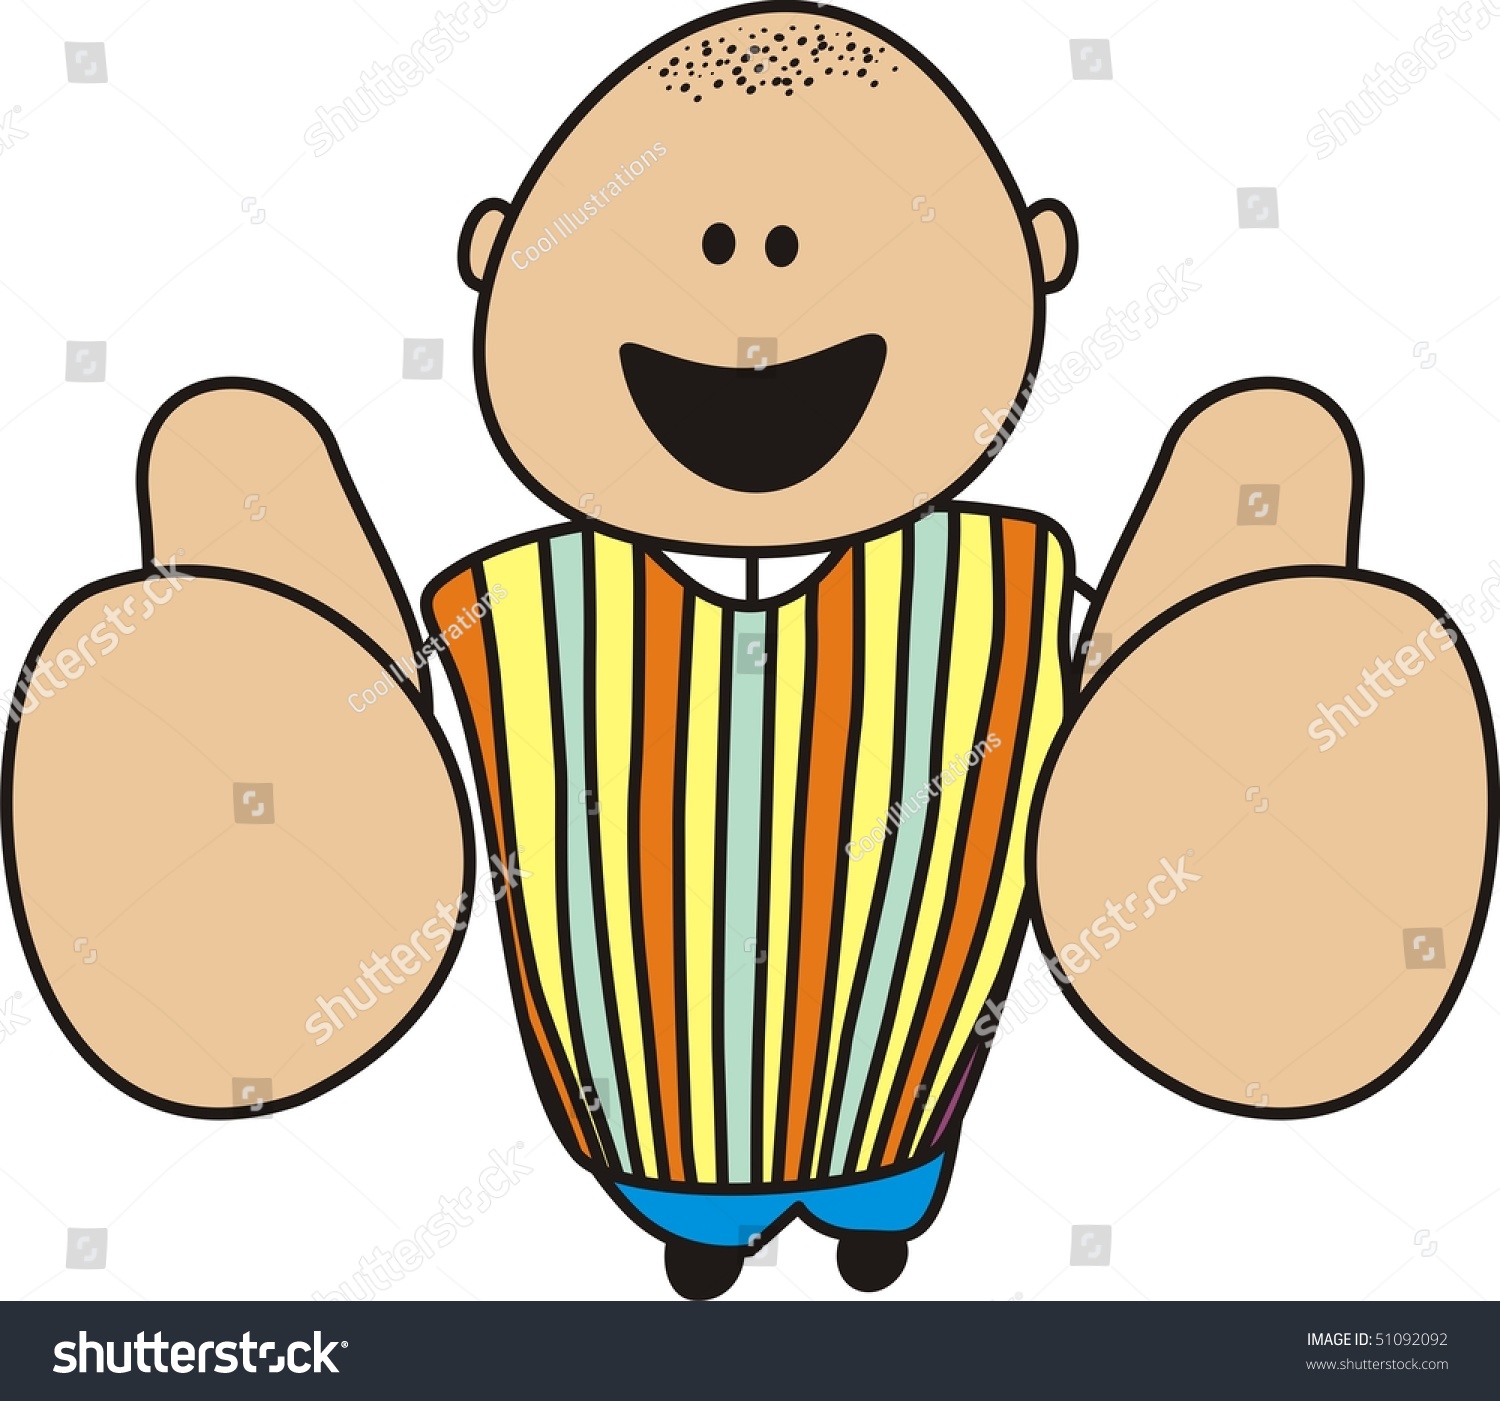 Two Thumbs Up Stock Vector Illustration 51092092 